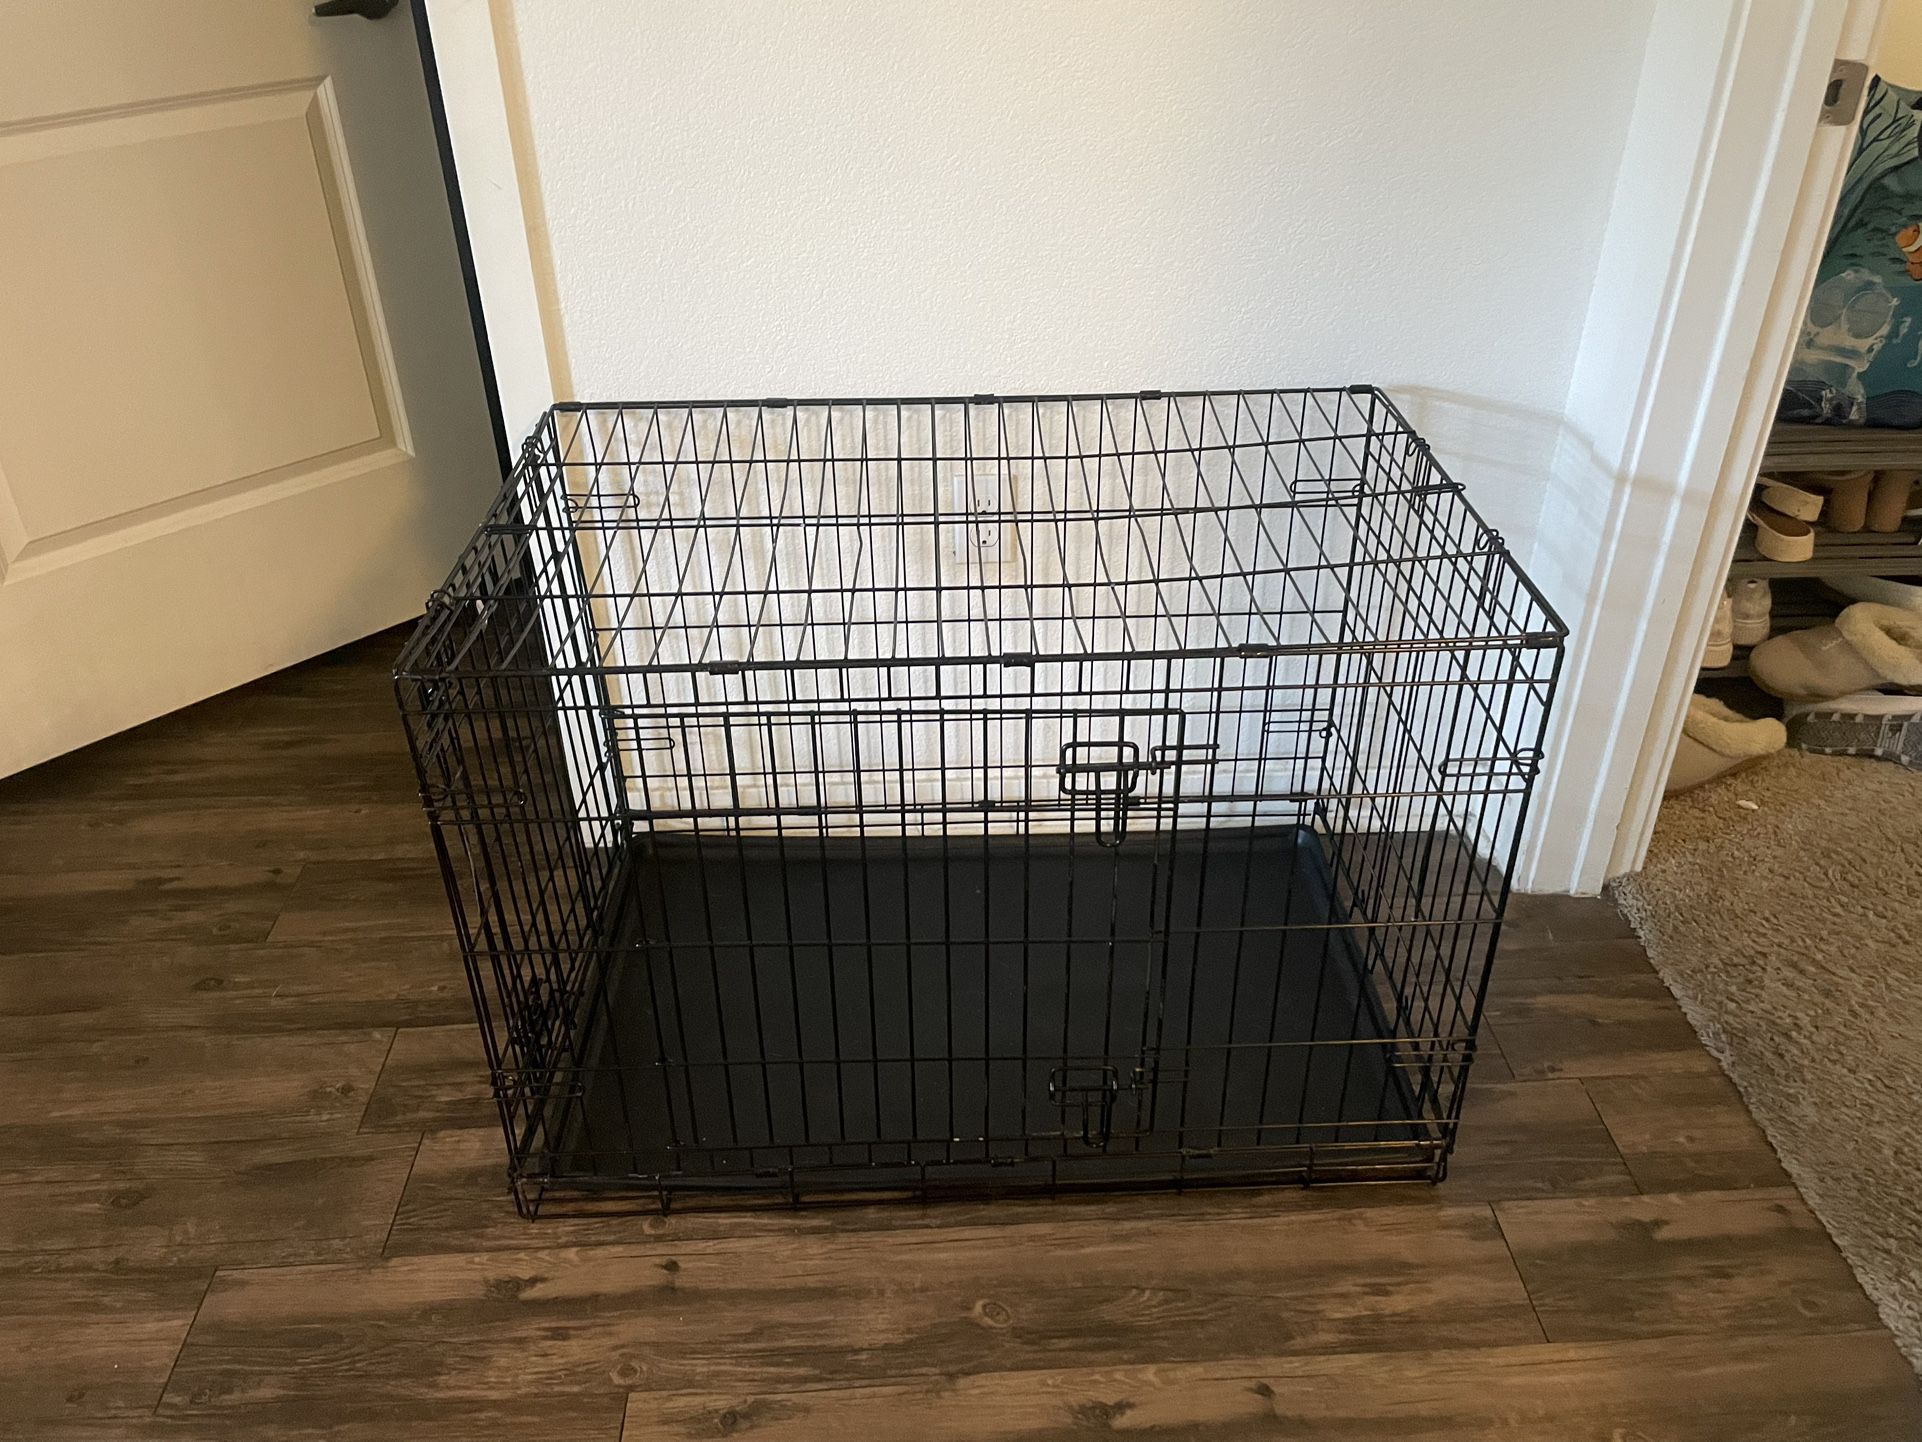 Crate for small/medium dog